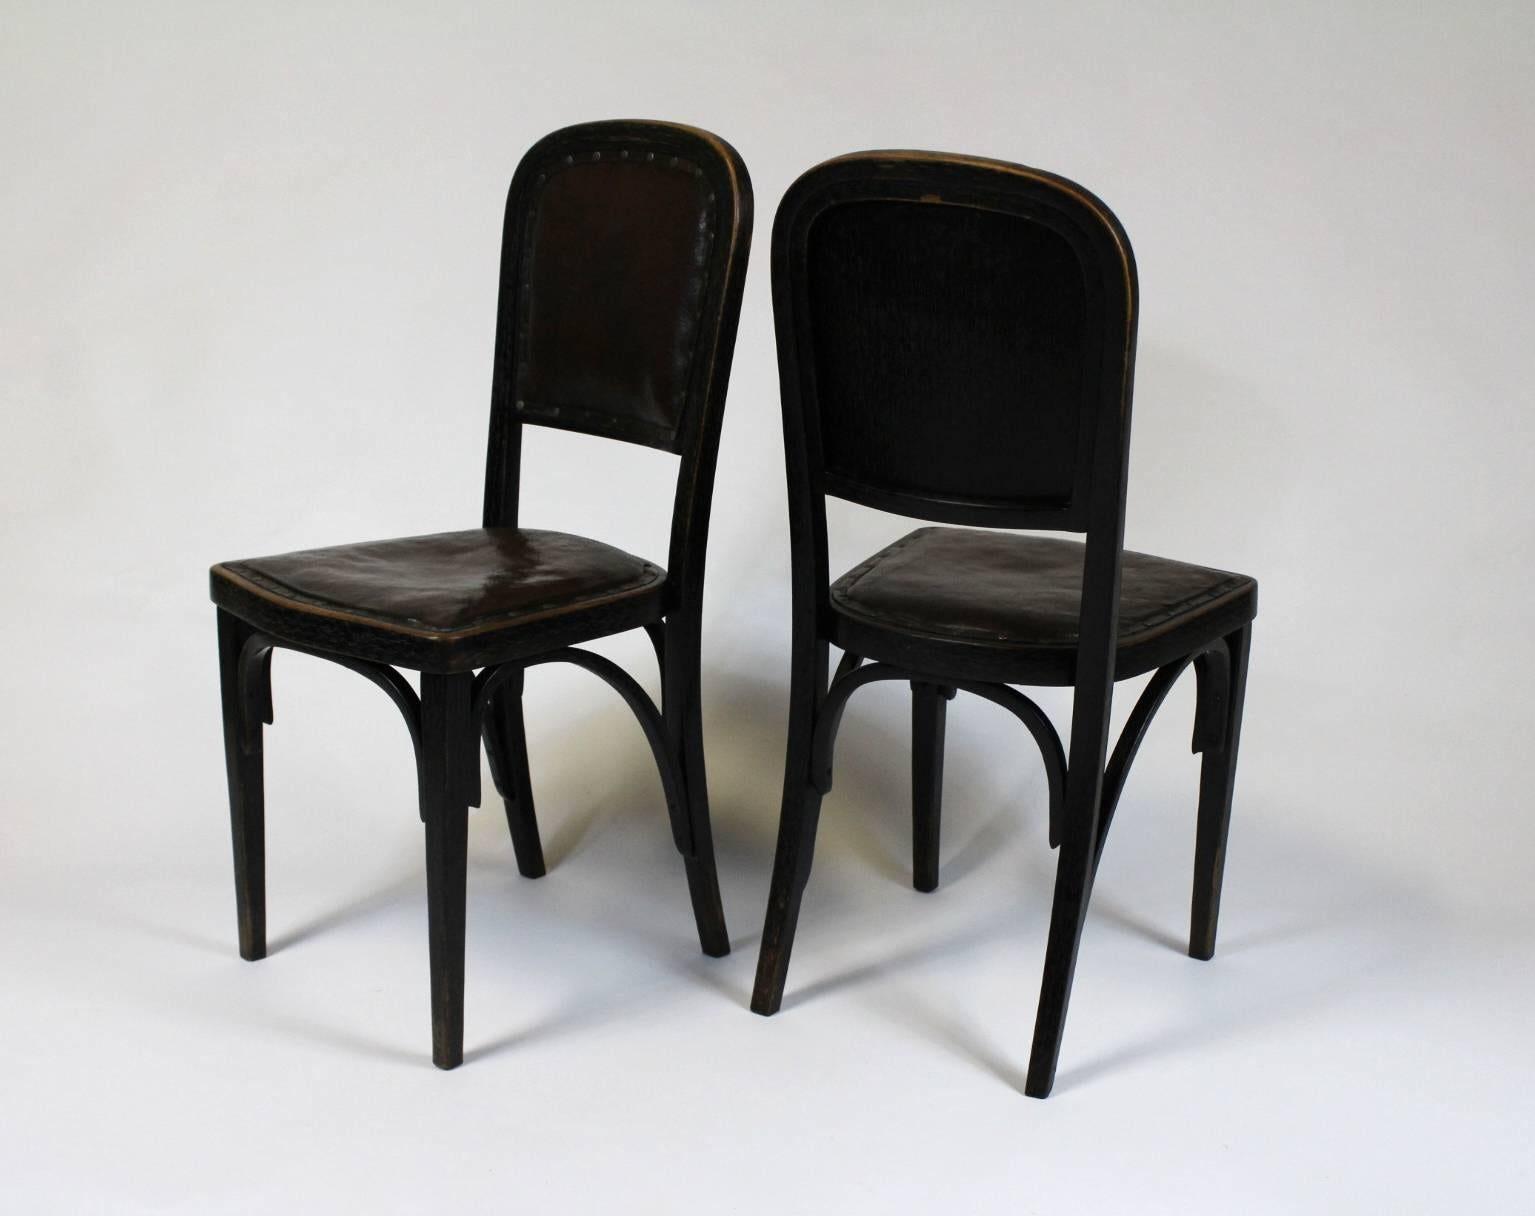 Four rare side chairs designed by Gustav Siegel, circa 1905, manufactured in 1914 by J. & J. Kohn in Vsetín, Czechoslovakia (labeled). Bent beechwood, original chocolate leather upholstery. Excellent original condition with perfect patina.